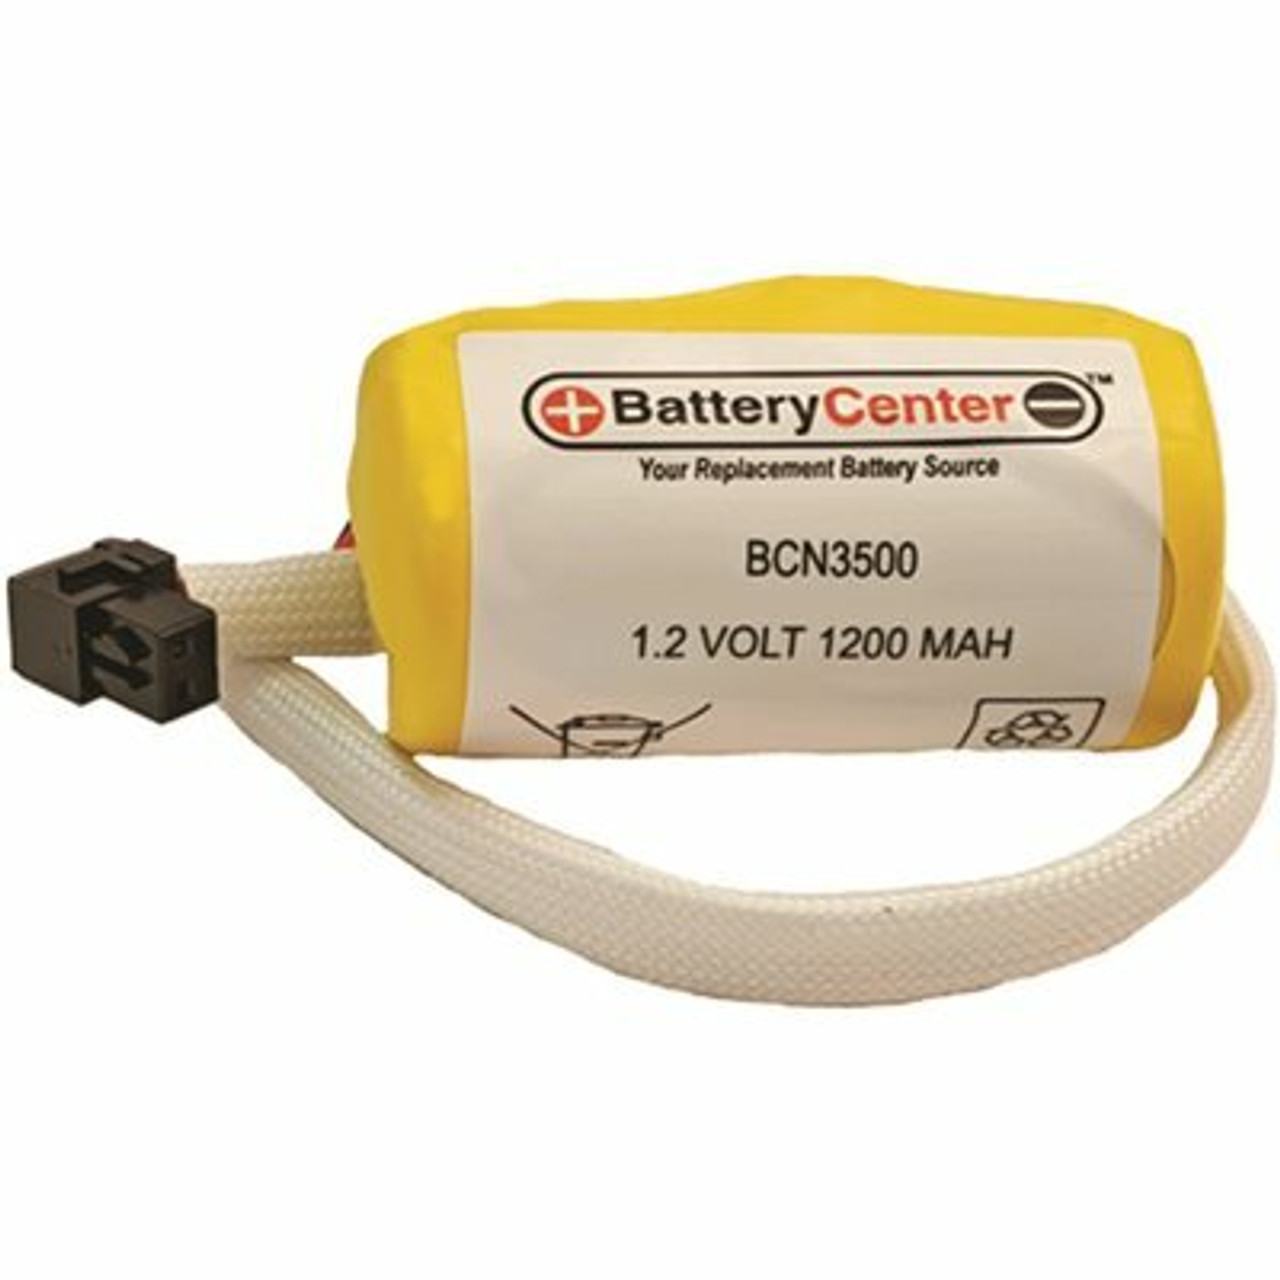 1.2-Volt 1200 Mah Replacement For The Elb-3500 Elb3500 Nickel Cadmium Emergency Lighting Battery (Rechargeable)